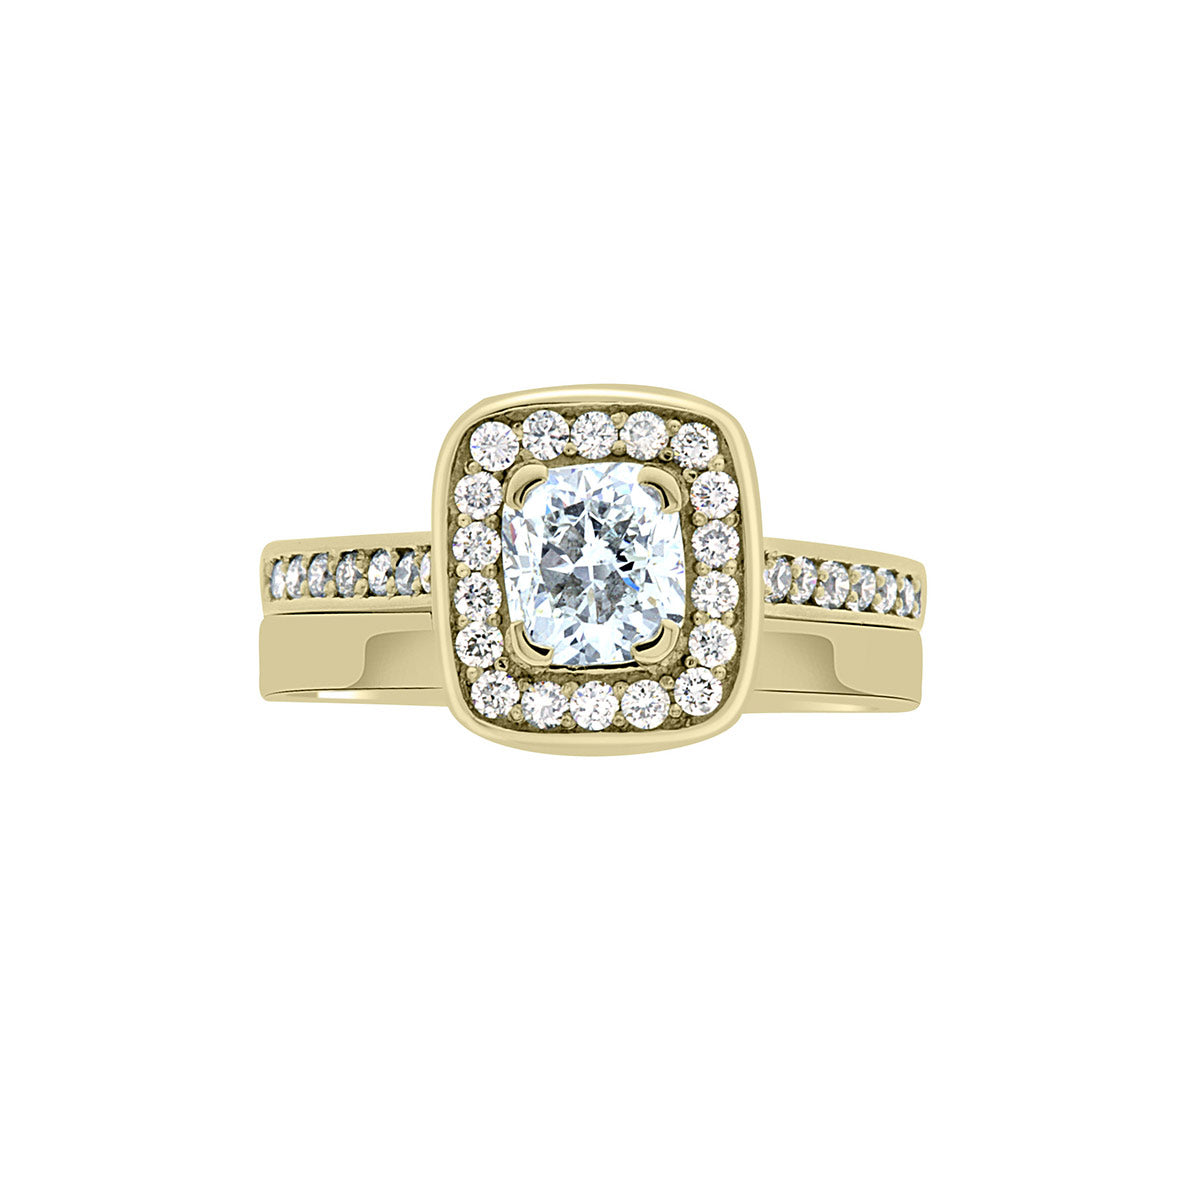 Cushion Cut Diamond Ring in yellow gold with a matching plain gold wedding ring